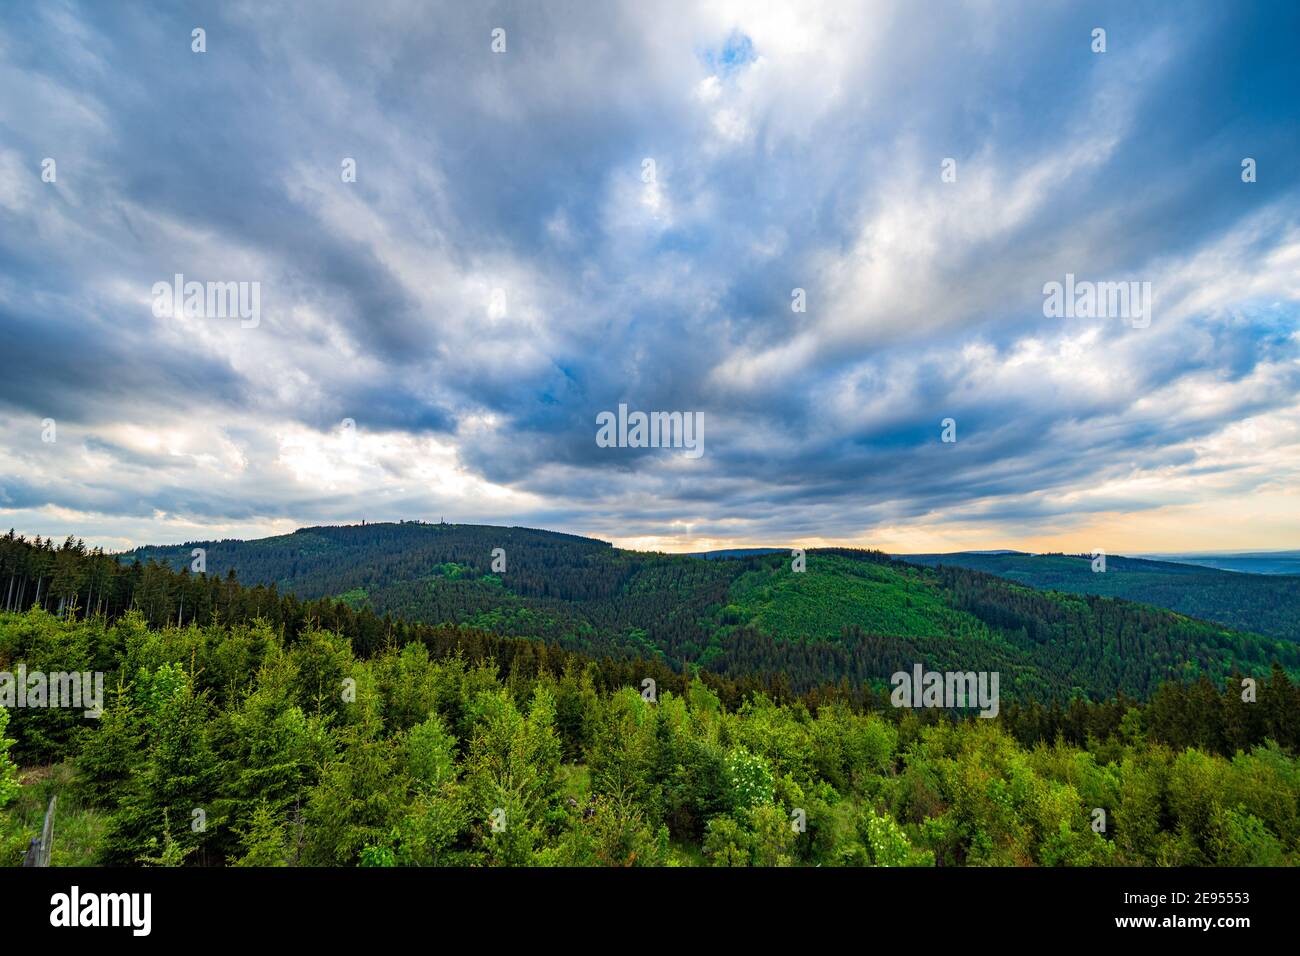 Pine trees in the Thuringian Forest Stock Photo